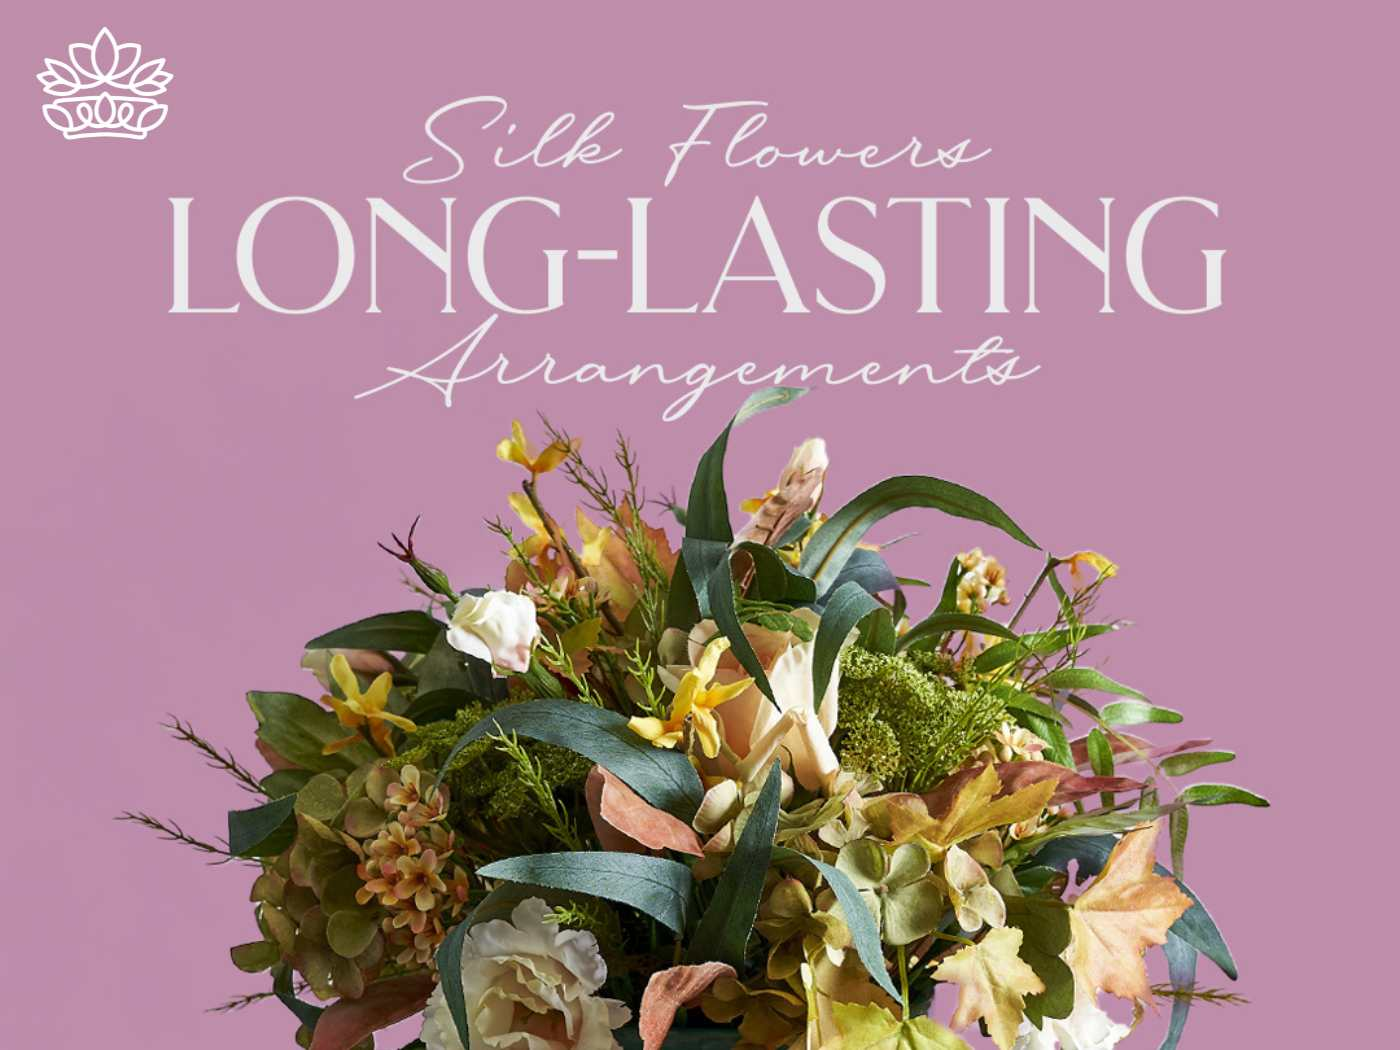 An exquisite bouquet of silk flowers presents a variety of textures and hues, emphasizing the durable allure of these LONG-LASTING Arrangements, a specialty of Fabulous Flowers and Gifts.